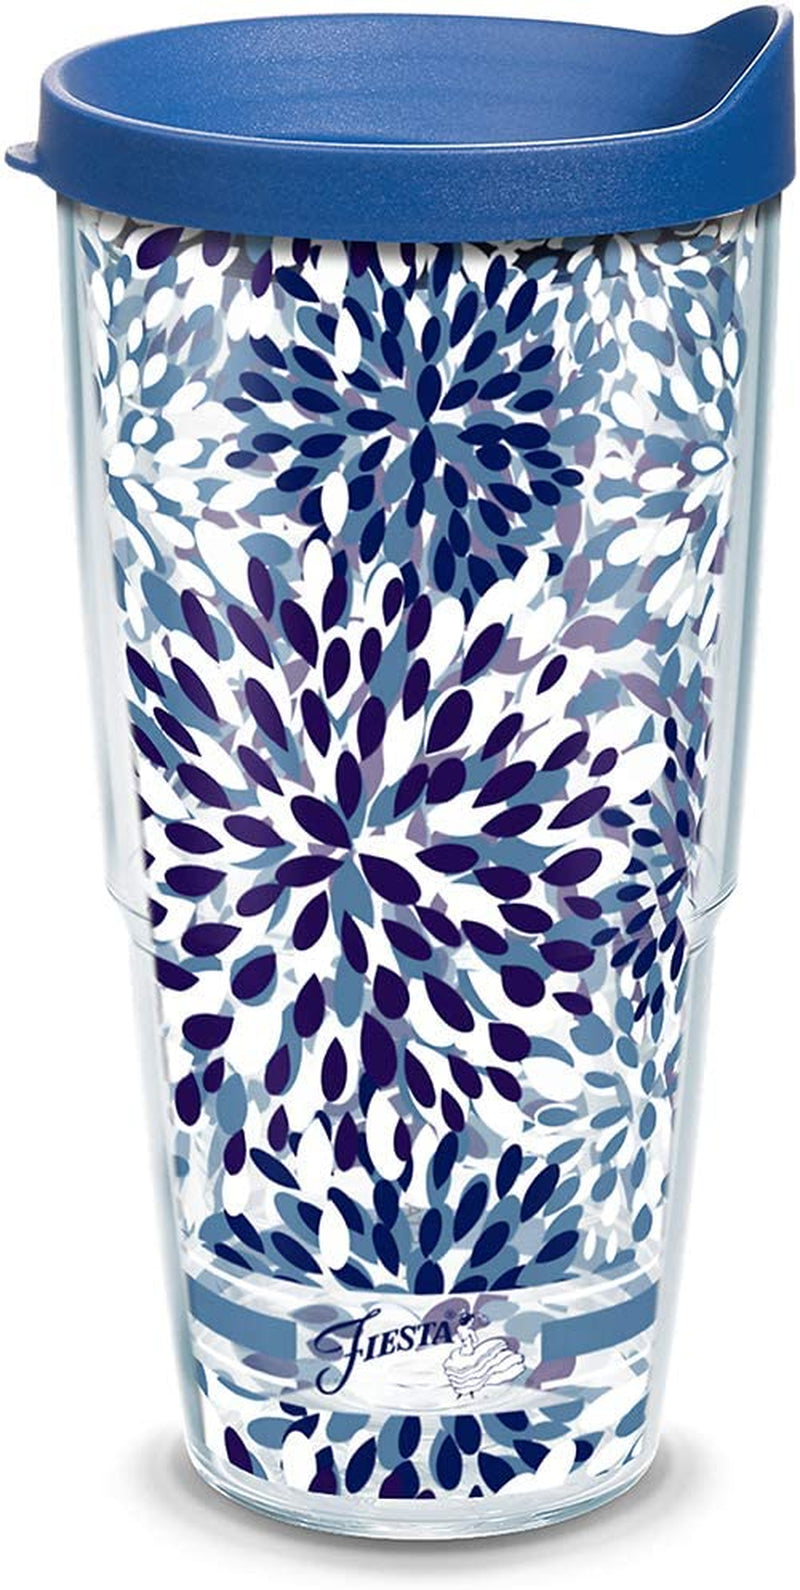 Tervis Made in USA Double Walled Fiesta Insulated Tumbler Cup Keeps Drinks Cold & Hot, 16Oz - 2Pk, Lapis Calypso Home & Garden > Kitchen & Dining > Tableware > Drinkware Tervis Tumbler Company Lidded 24oz 